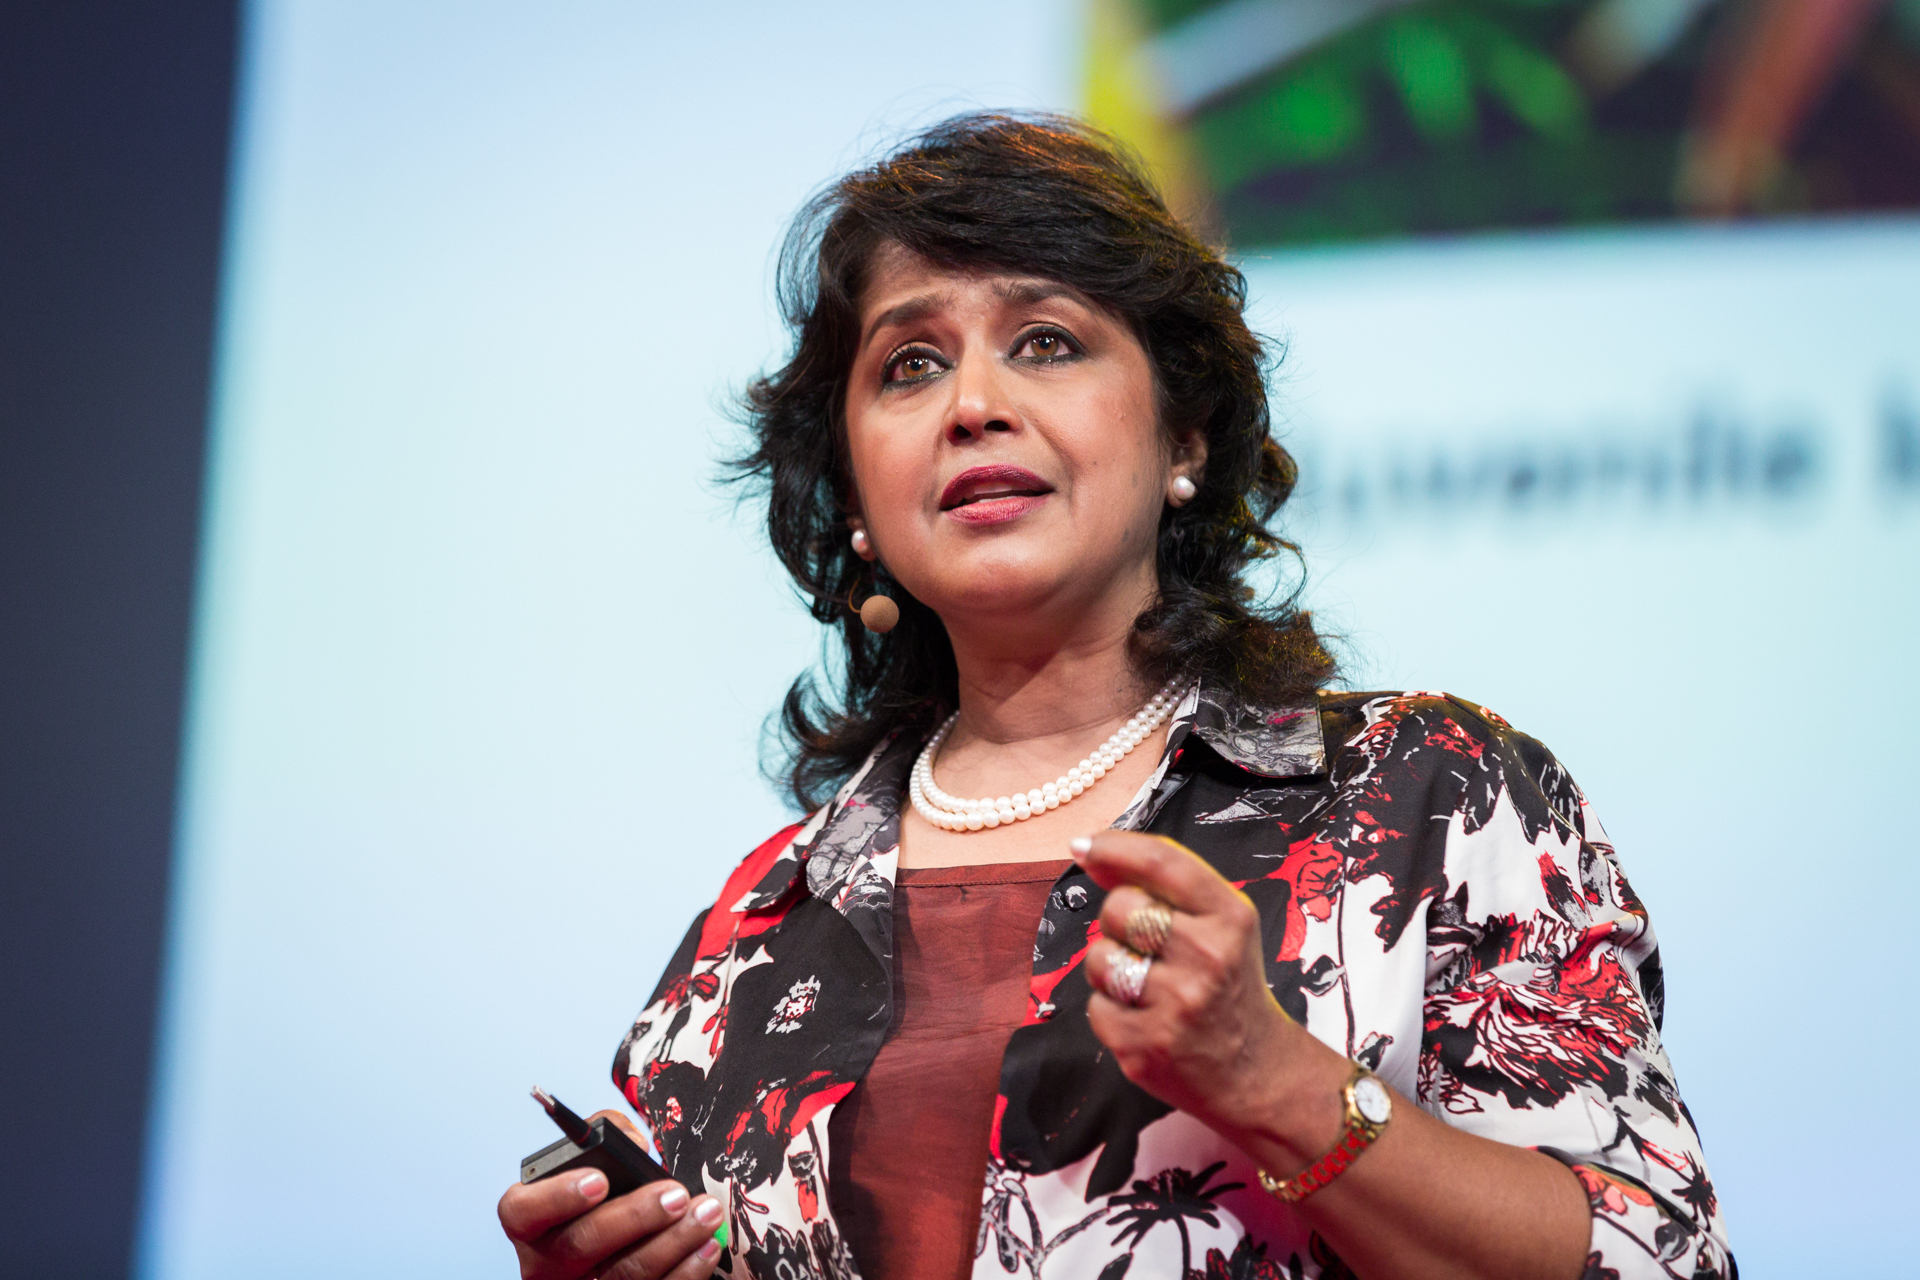 Ameenah Gurib-Fakim was just sworn in as the first female president of Mauritius. A TEDGlobal 2014 speaker, she tells us how this happened and what she plans to do while in office. Photo: James Duncan Davidson/TED